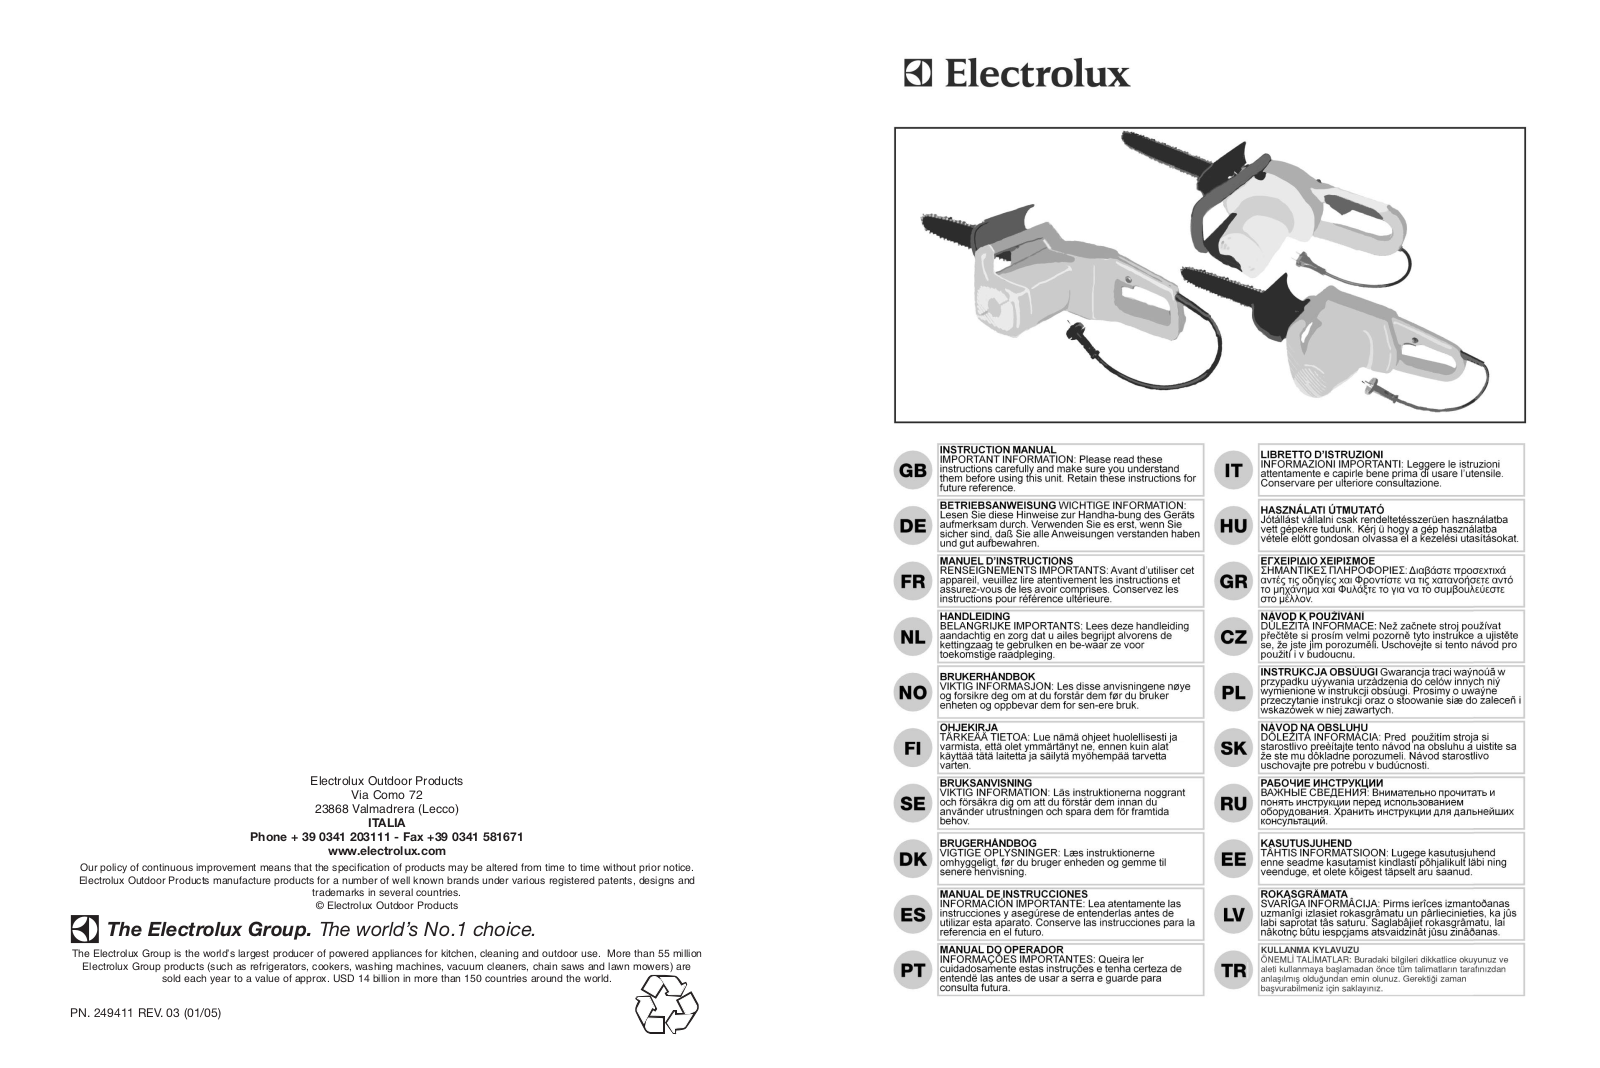 Electrolux P 1916 + CHAIN, P 1435 CH, P 1640 + CHAIN, P 2114 + 10M CABLE, P 1535 CH Manual